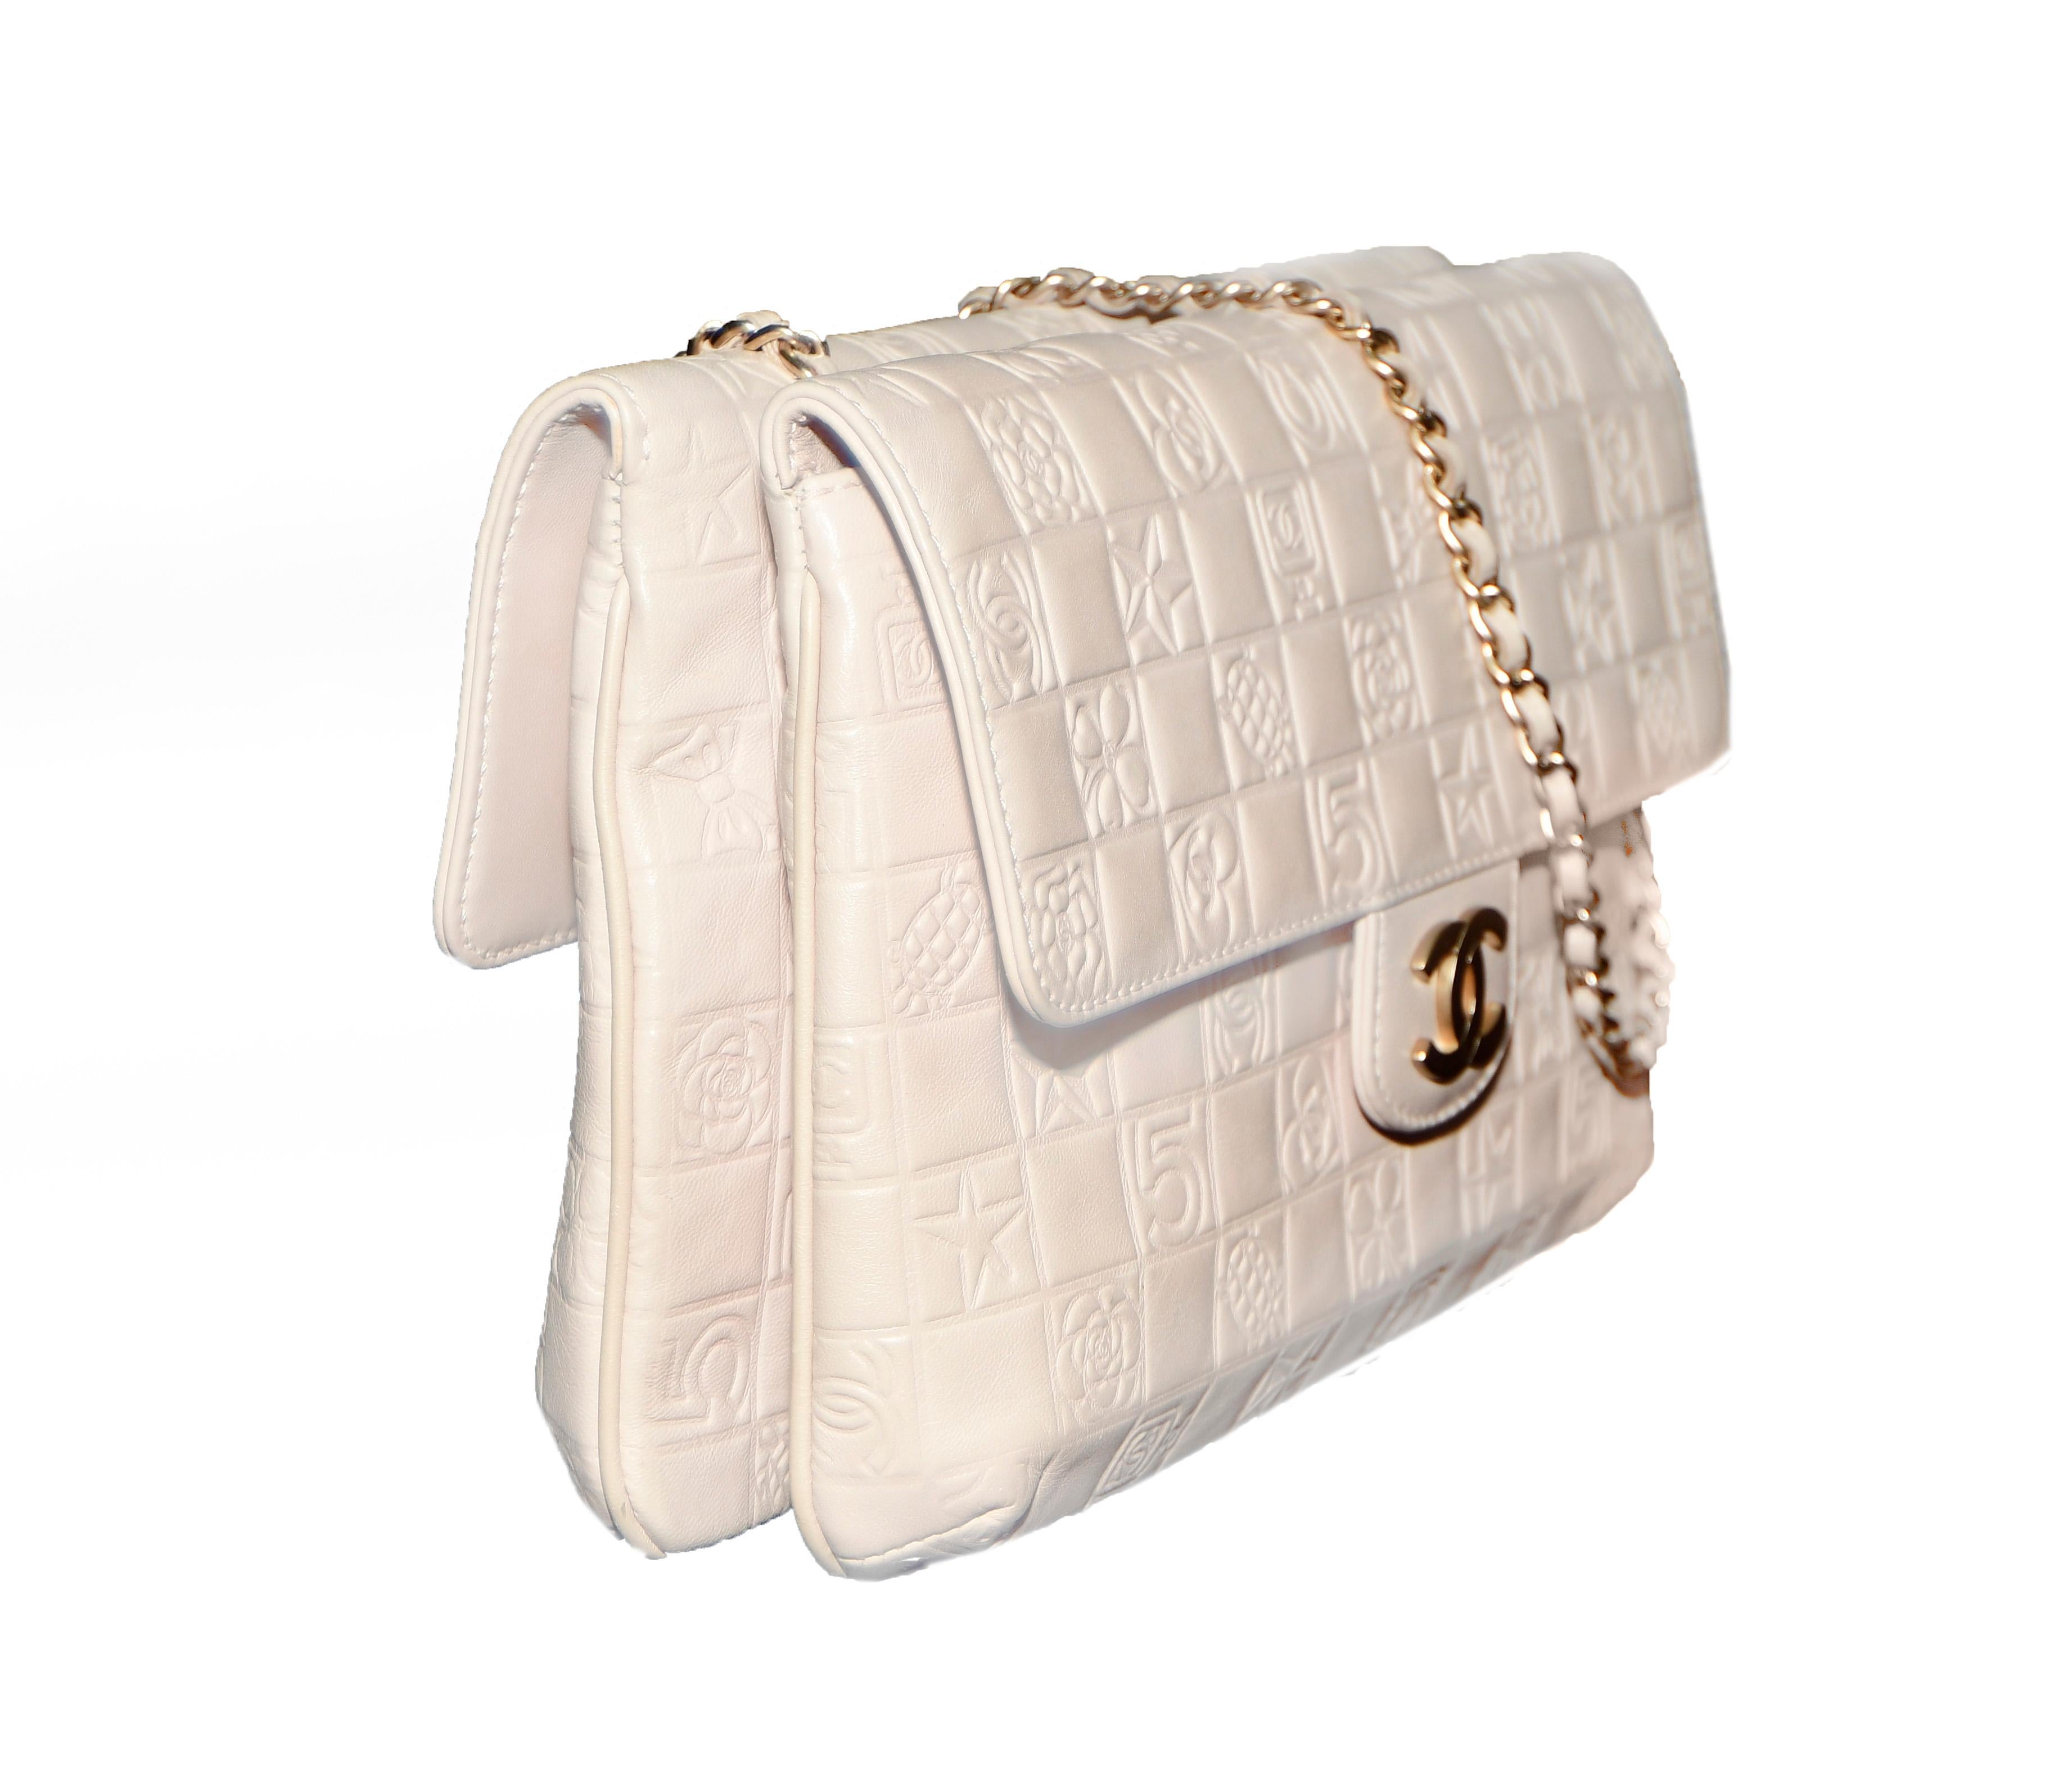 Chanel limited edition logo embossed flap bag in caramel lambskin leather includes two flap bags back to back.  With single leather and chain strap and brushed gold hardware, this bag is lined with Camellia fabric in the two interior pockets.  This